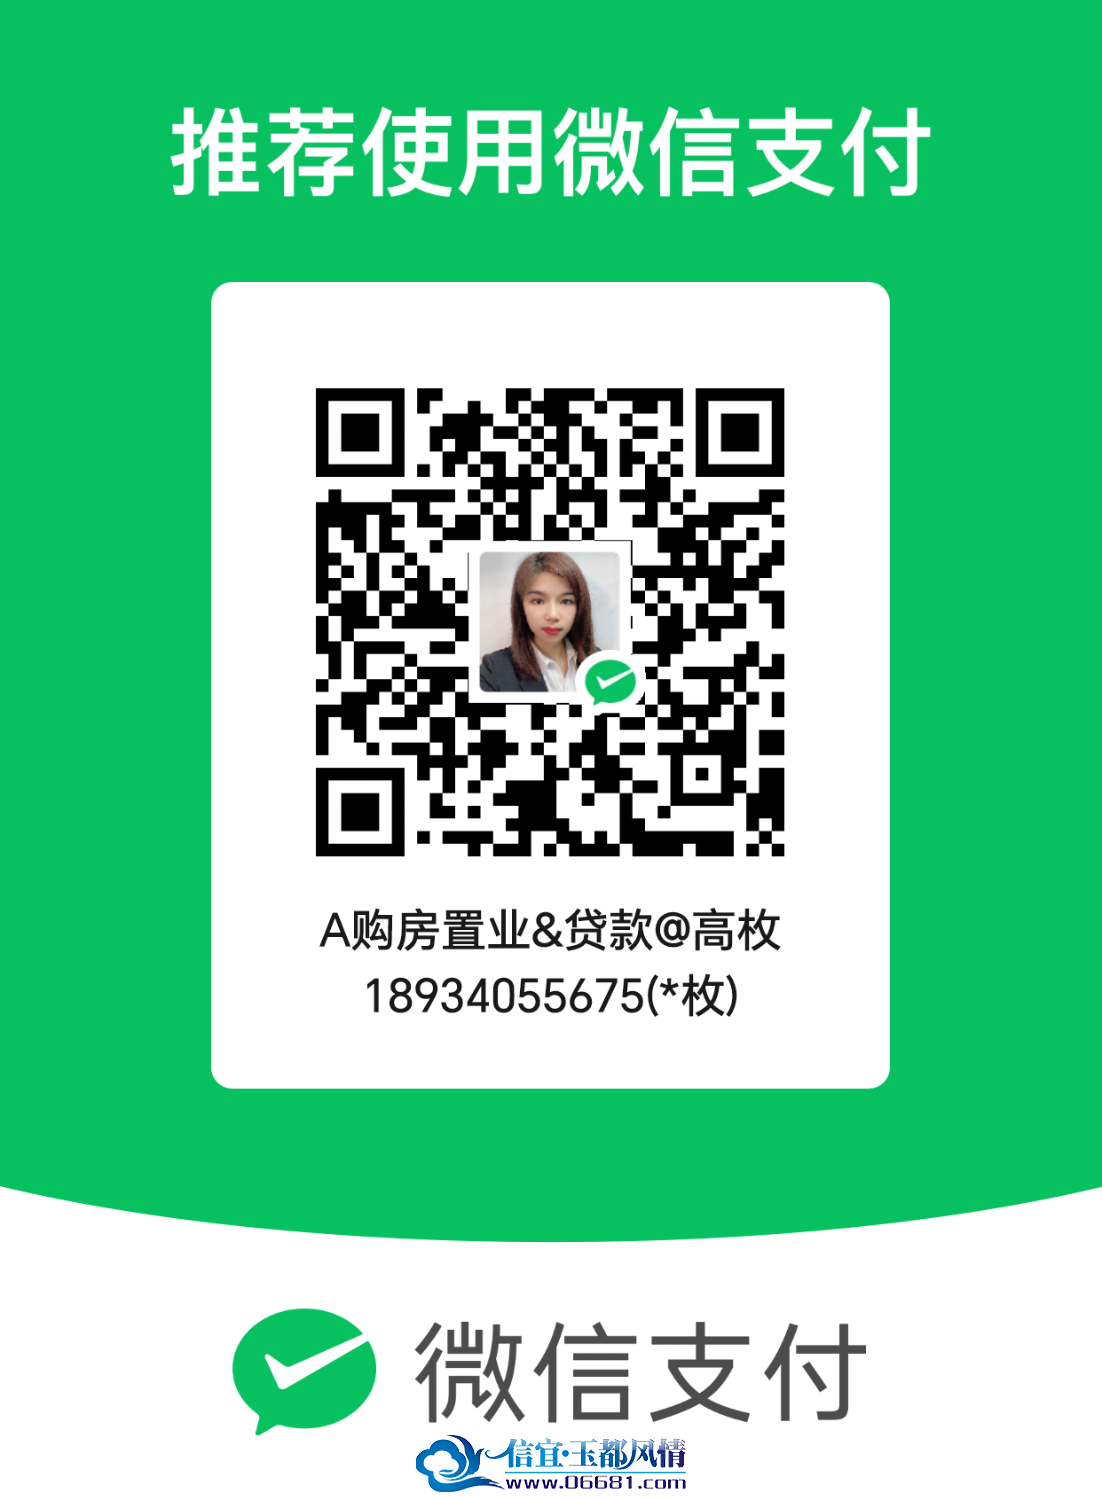 mm_facetoface_collect_qrcode_1711804201949.png